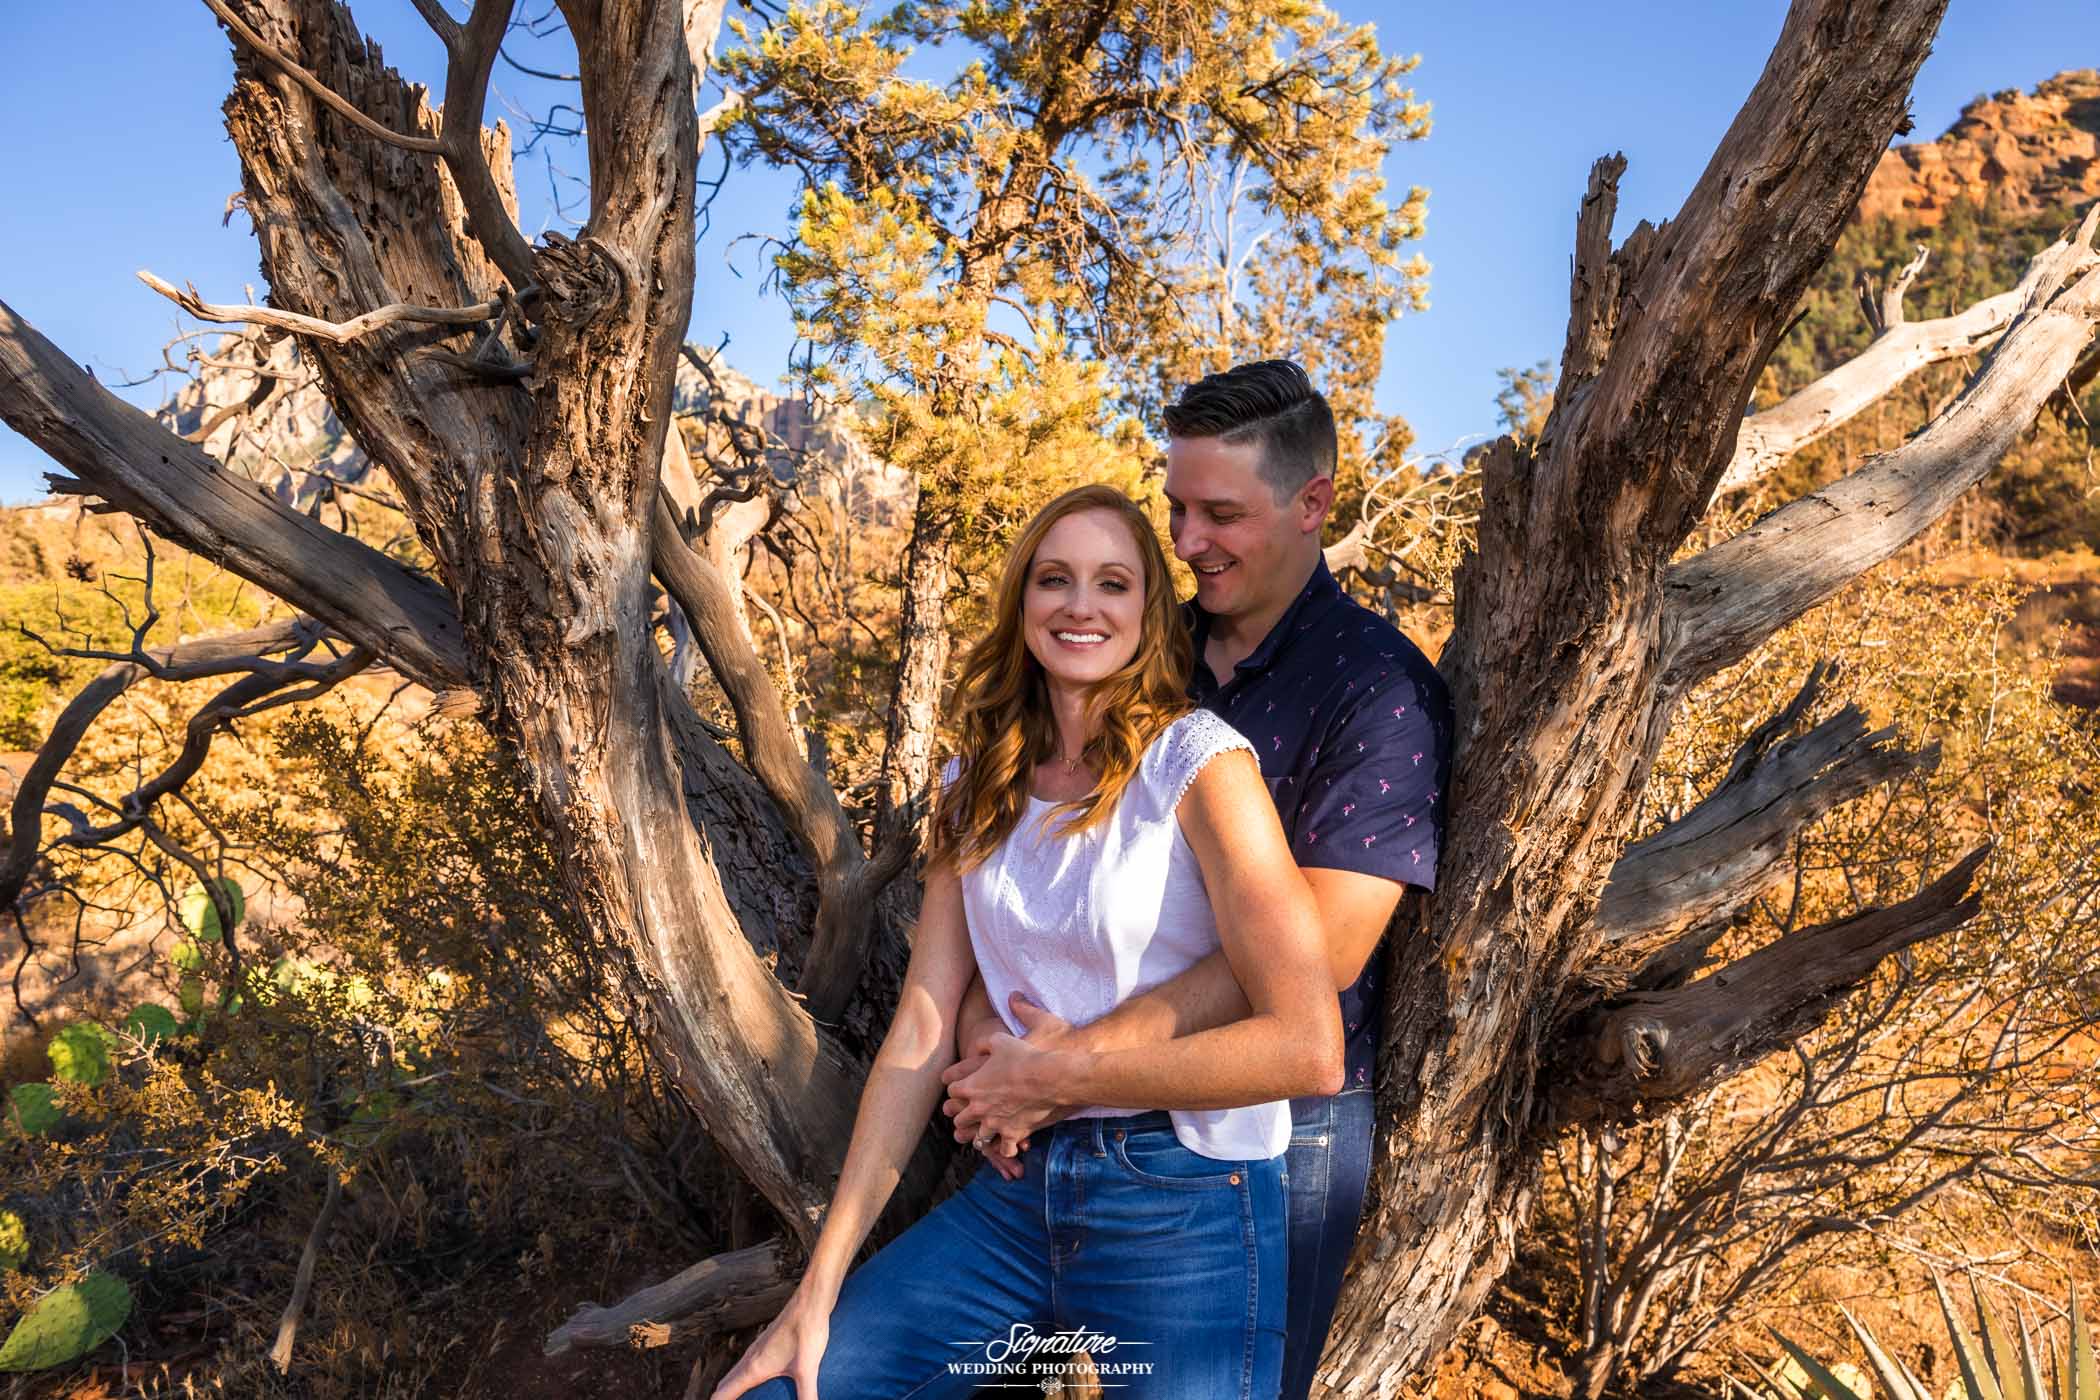 Man embracing woman in front of desert tree